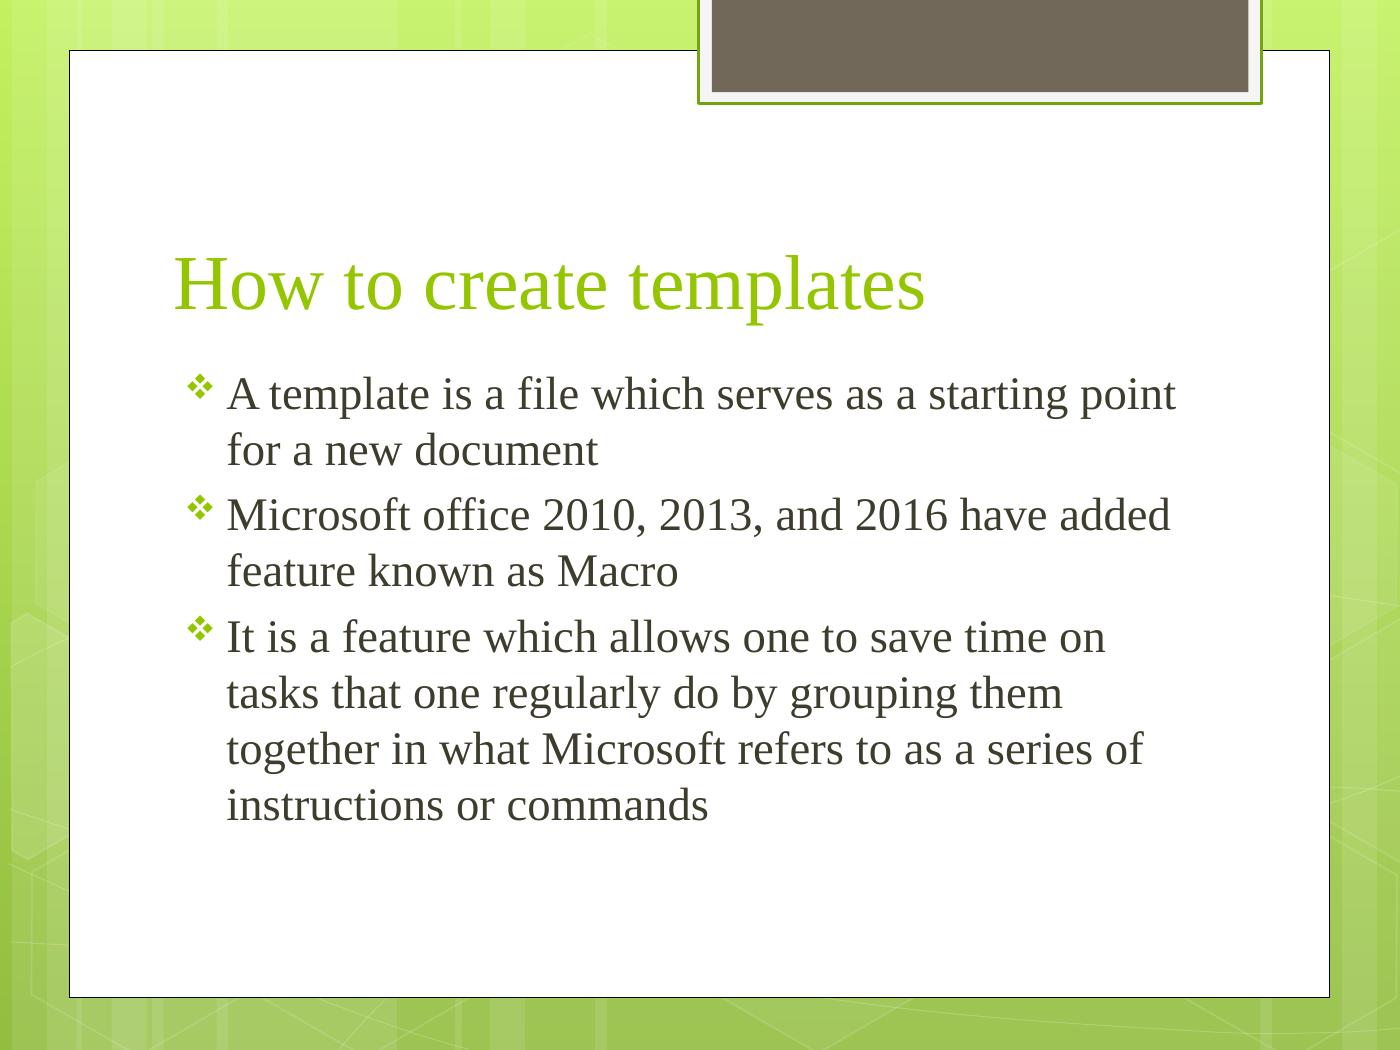 How to create templates - Overview of Macro_2